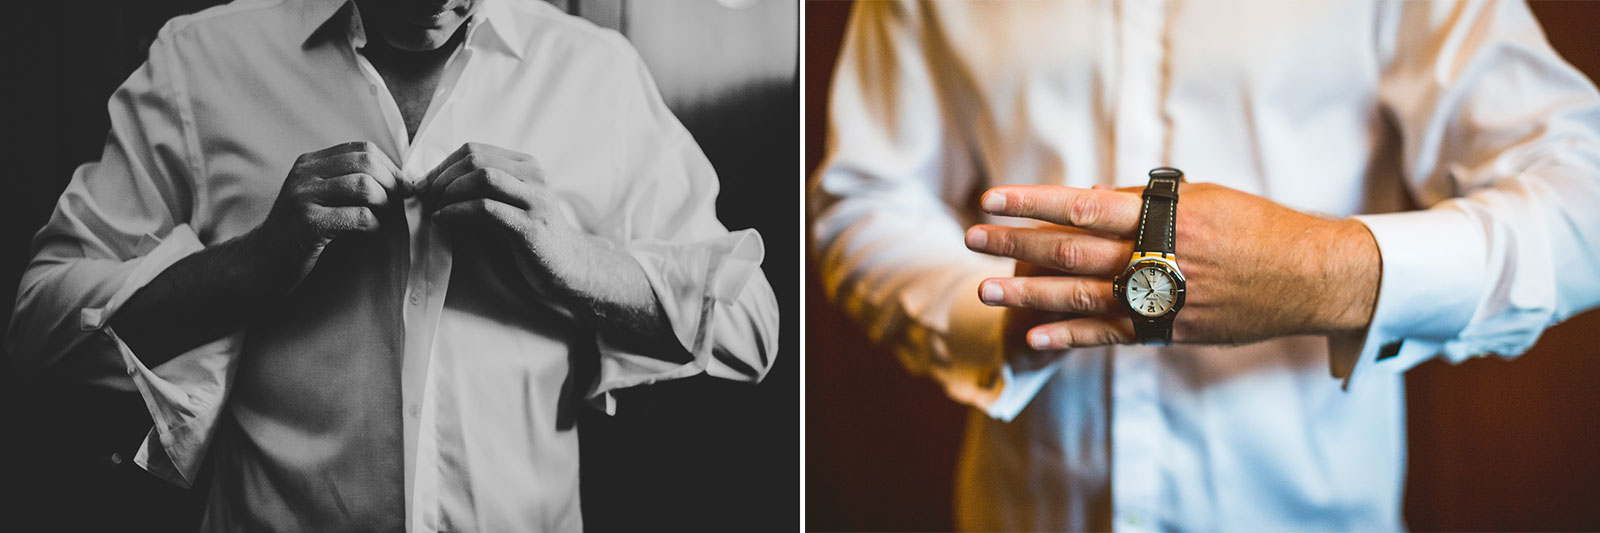 08 groom details at wedding - Stephanie + Zack // Conway Farms Chicago Wedding Photographers